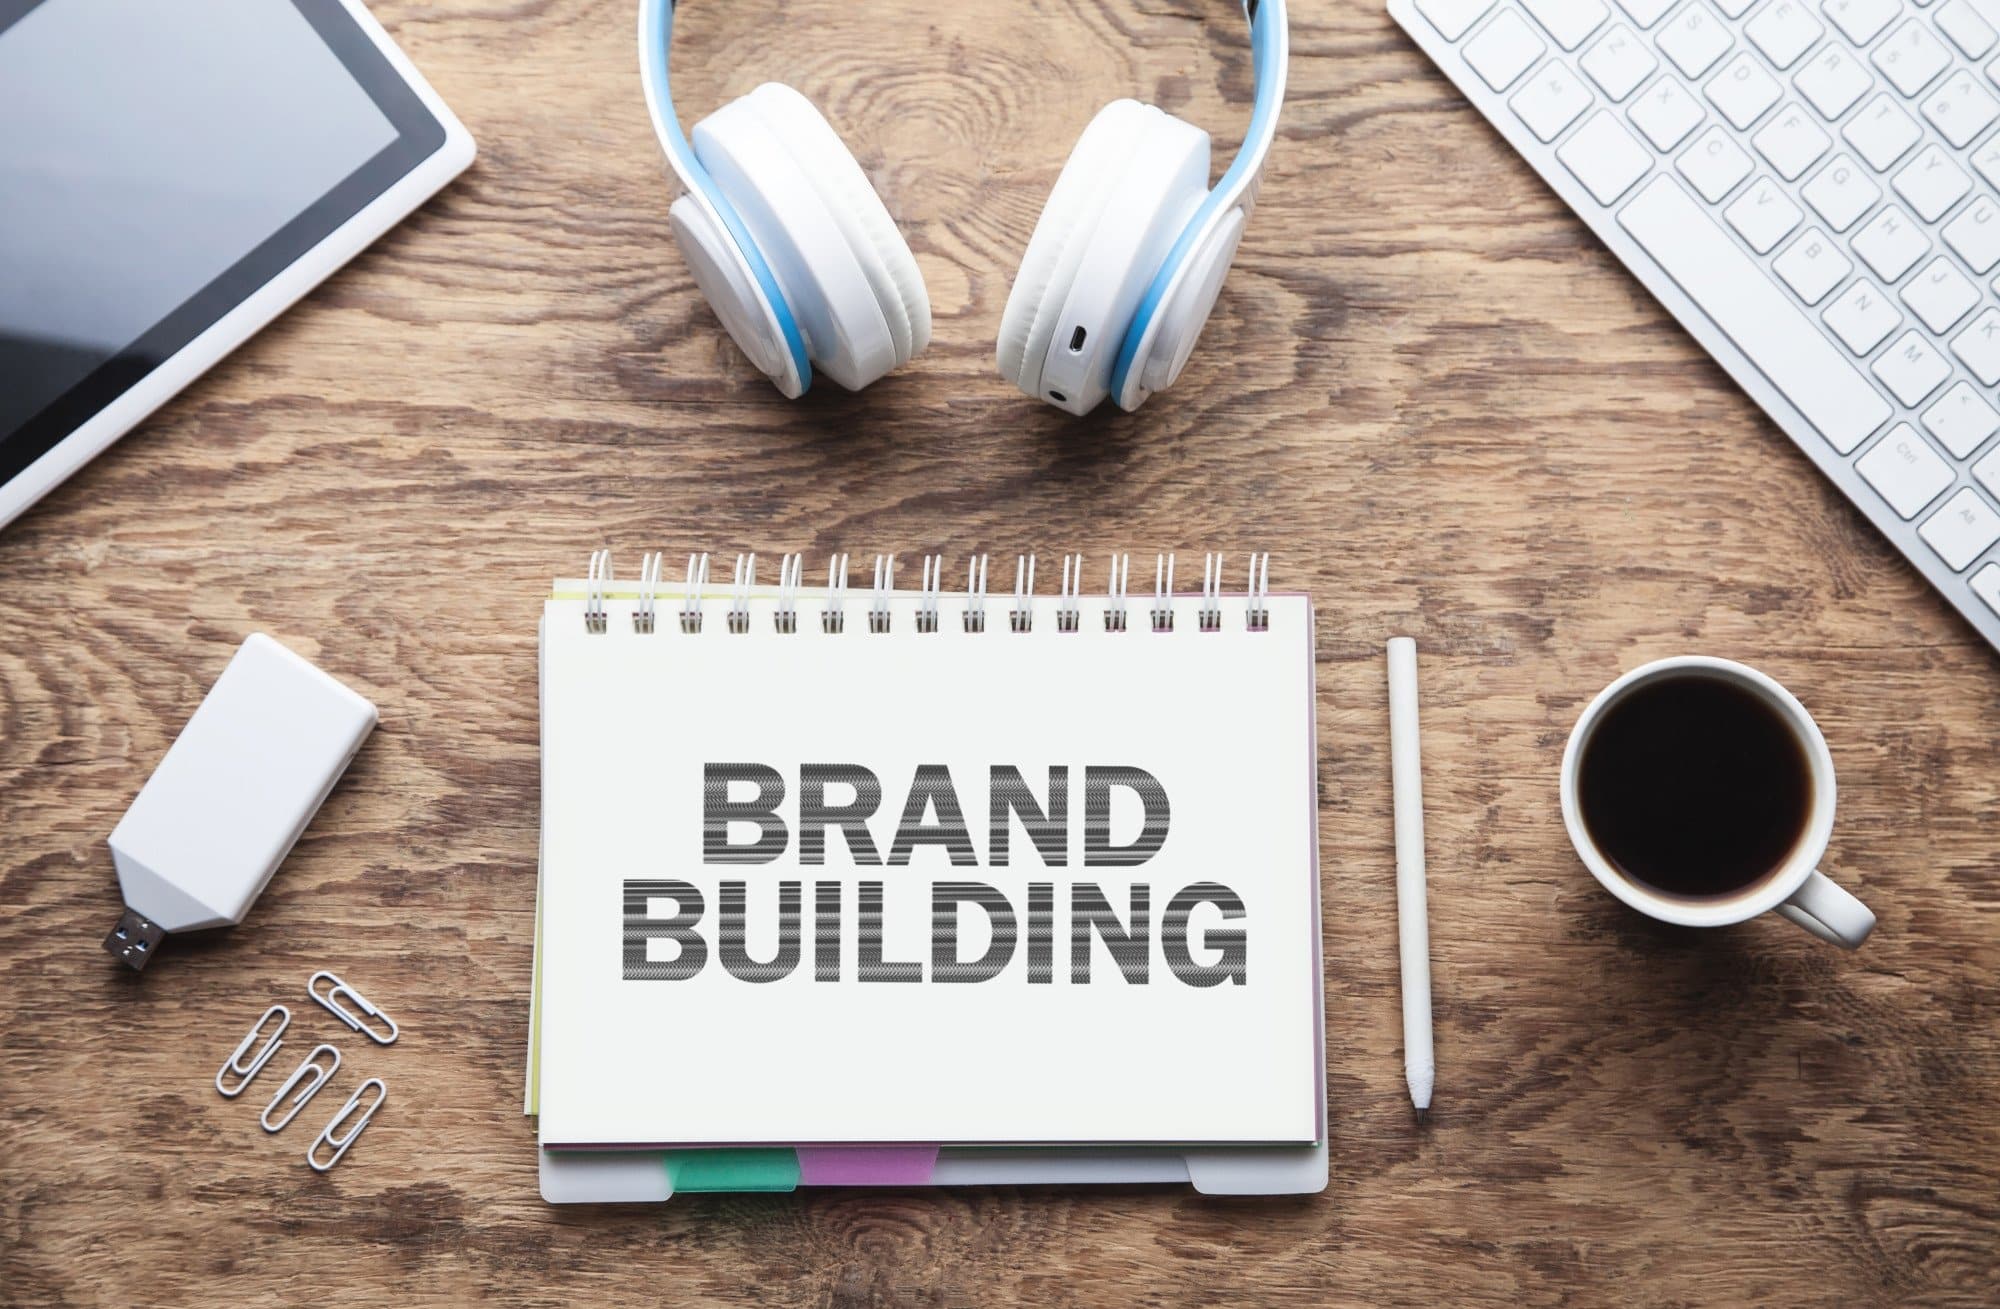 How to Build Brand Awareness: The Ultimate Guide